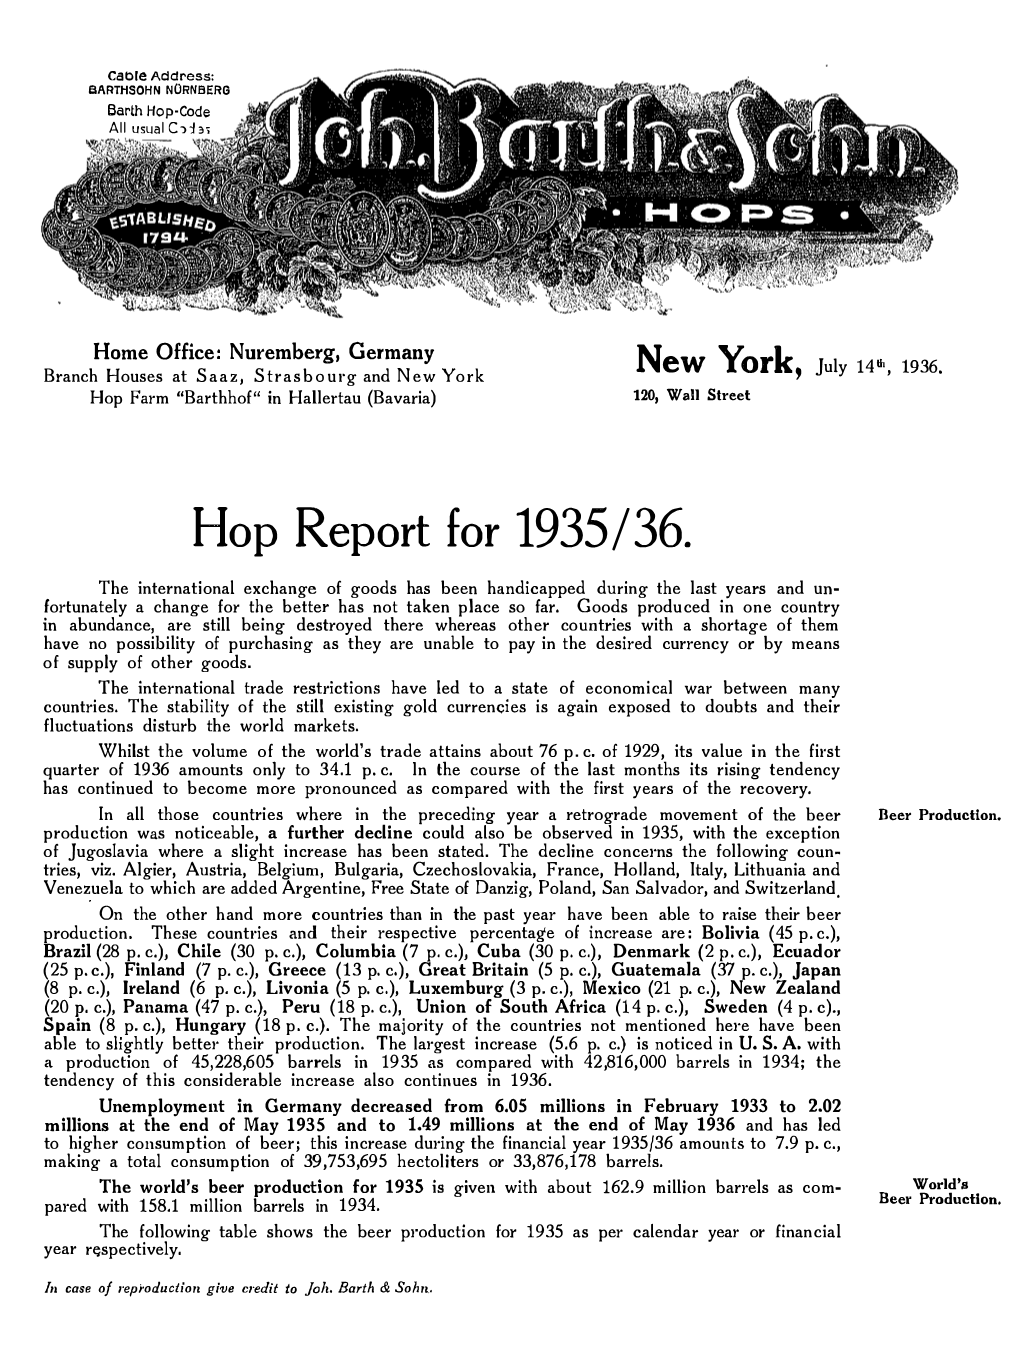 Hop Report for 1935/36